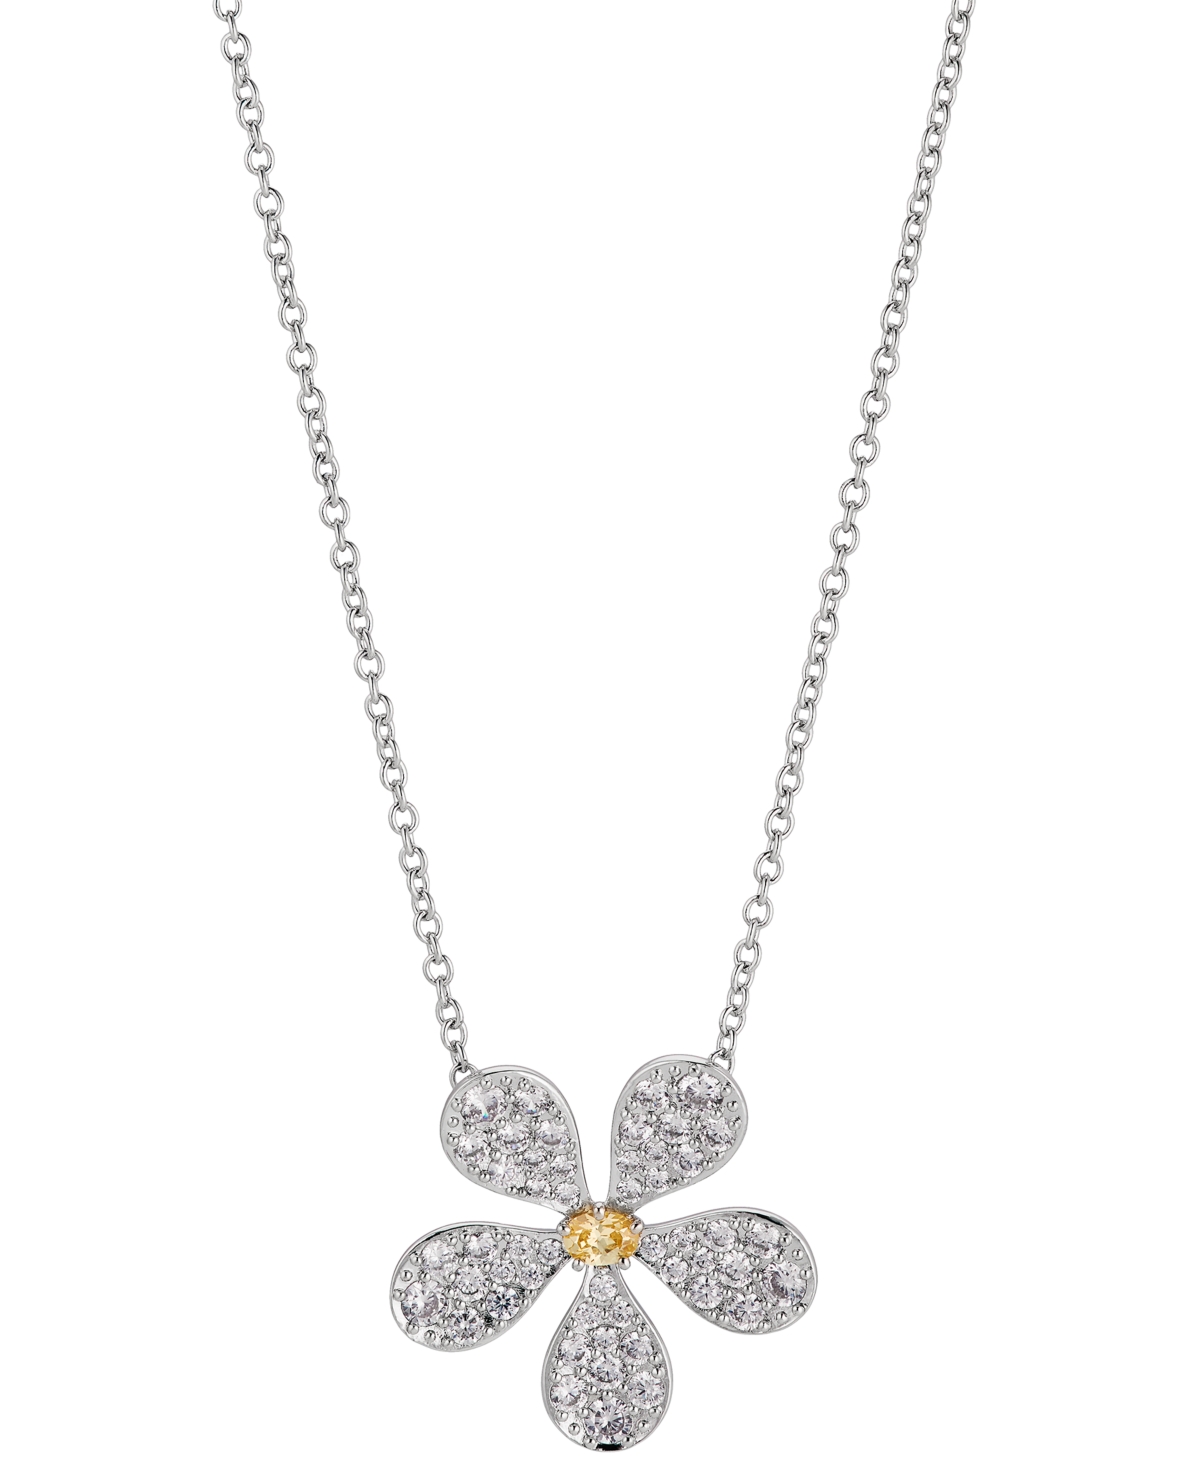 Rhodium-Plated Cubic Zirconia Daisy Pendant Necklace, 16" + 2" extender, Created for Macy's - Rhodium